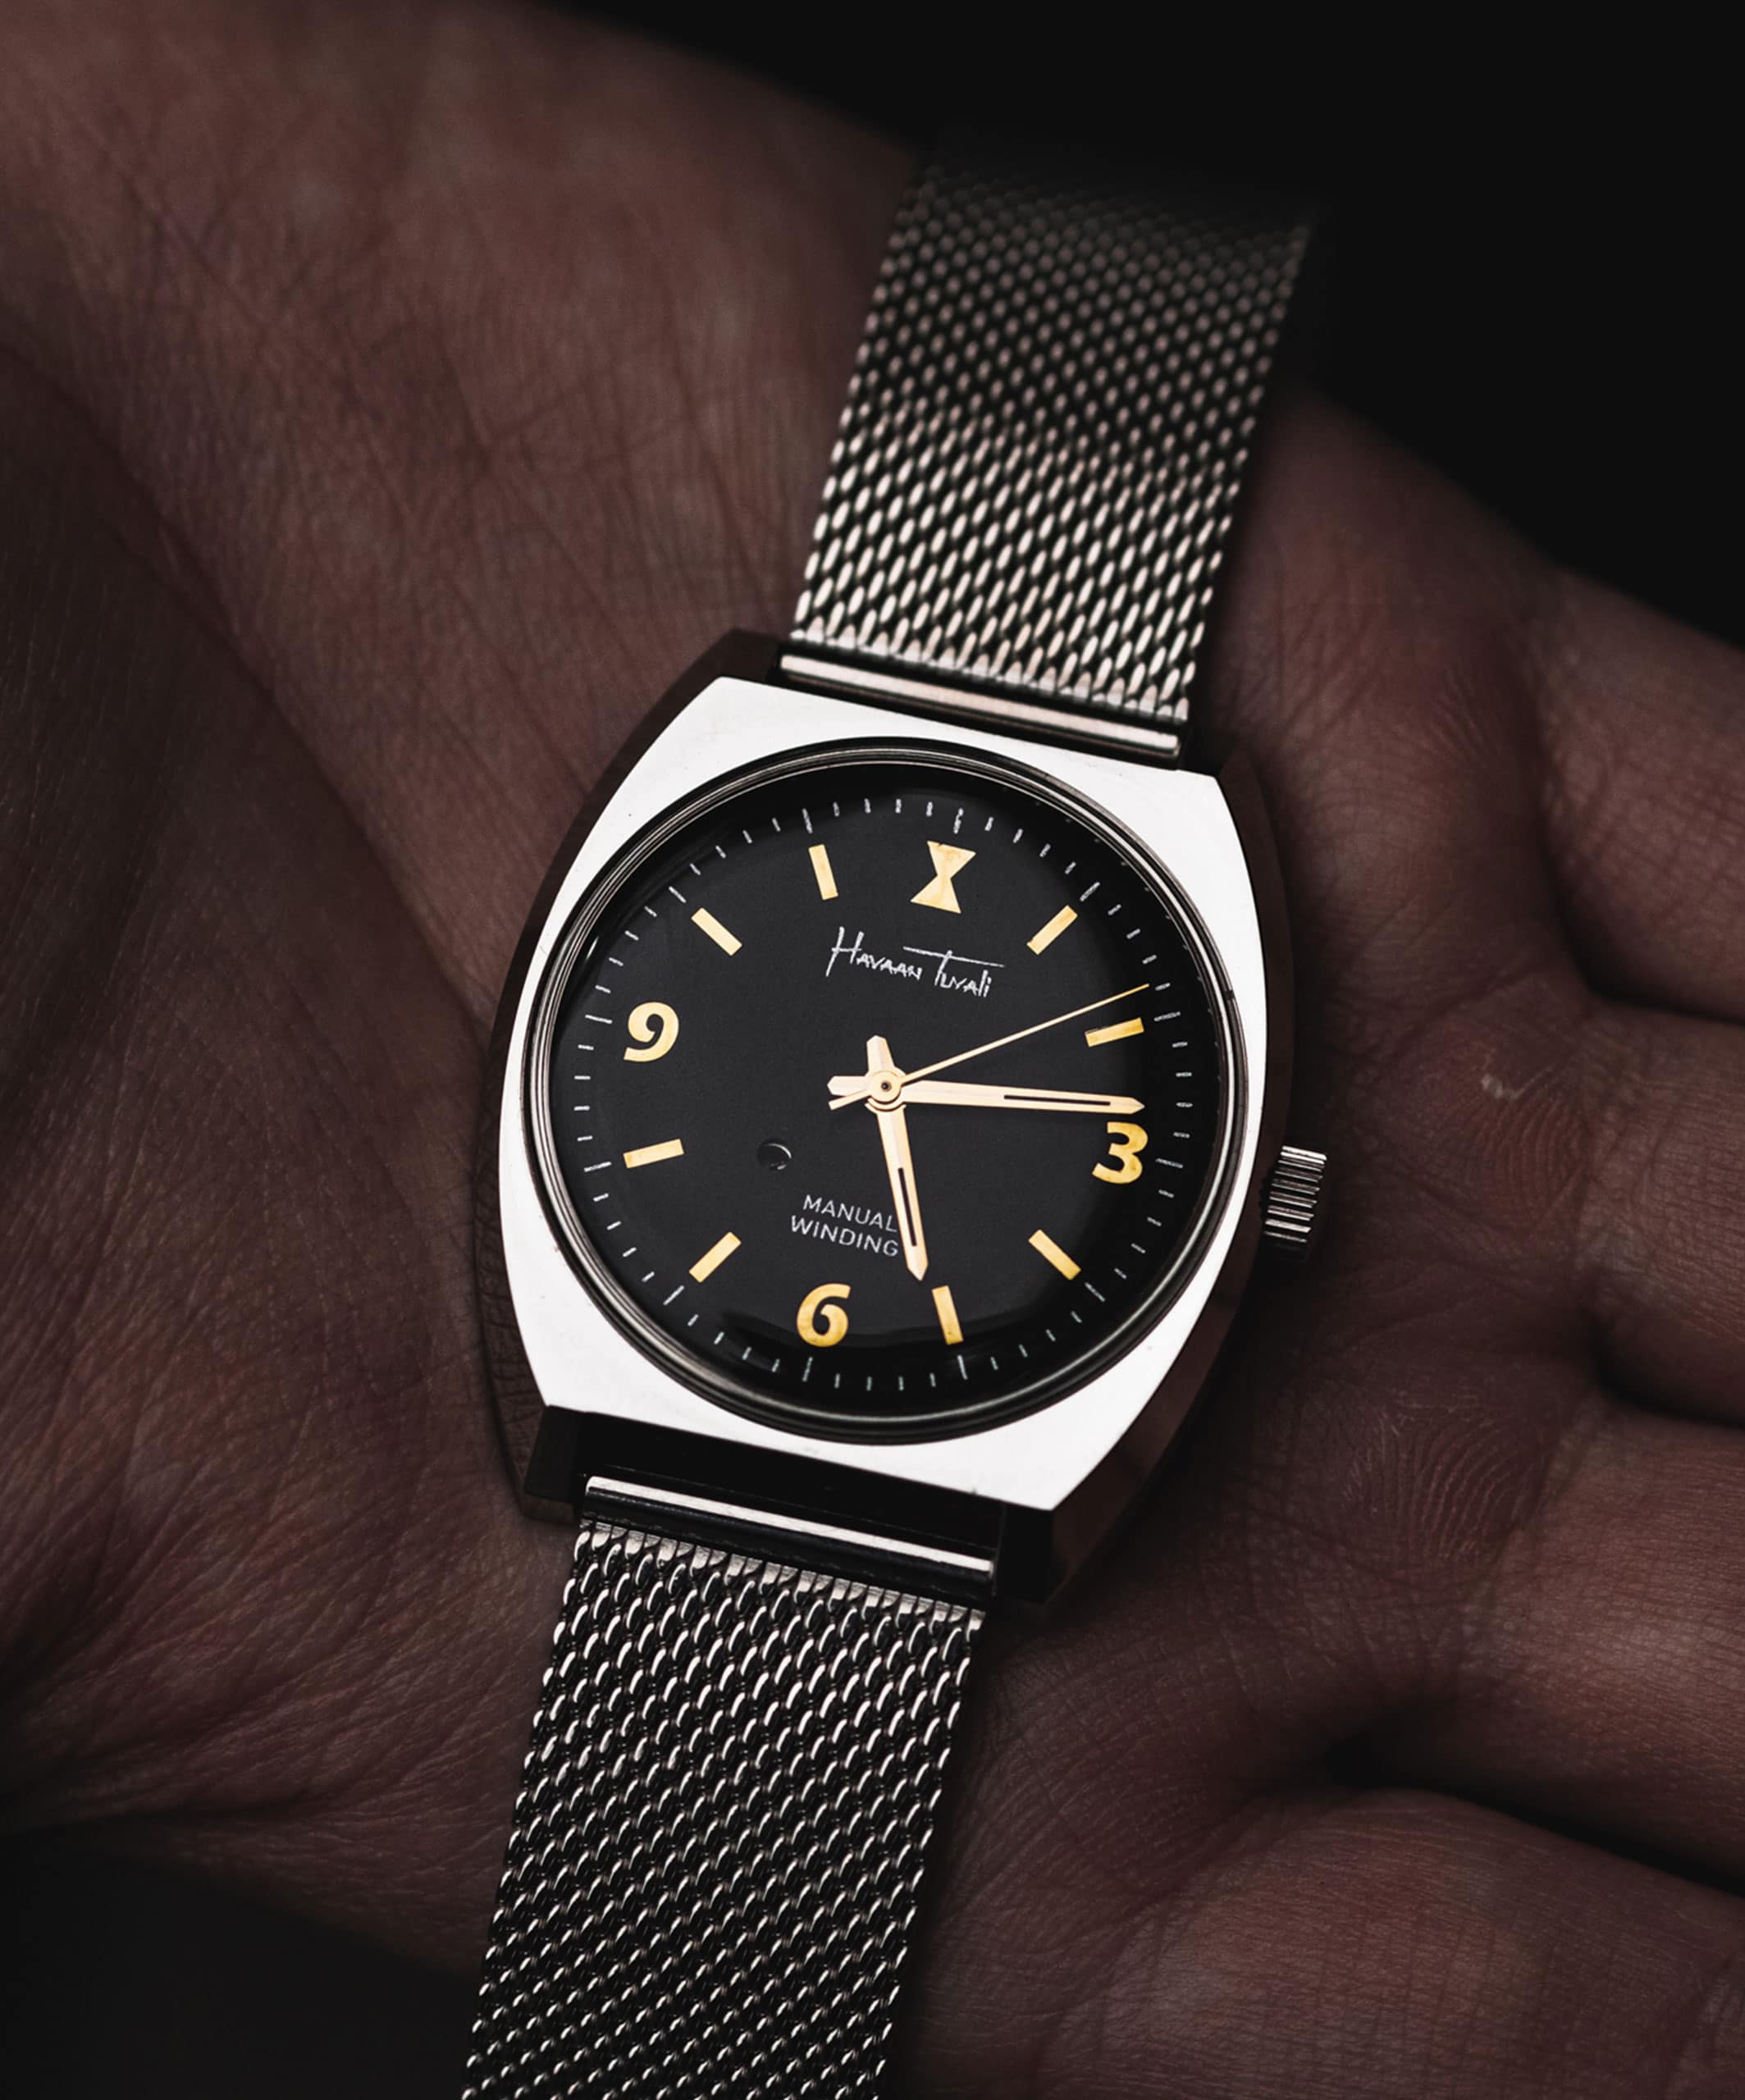 Havaan Tuvali Introduces the Heritage 72, a New Watch Made with Vintage Components